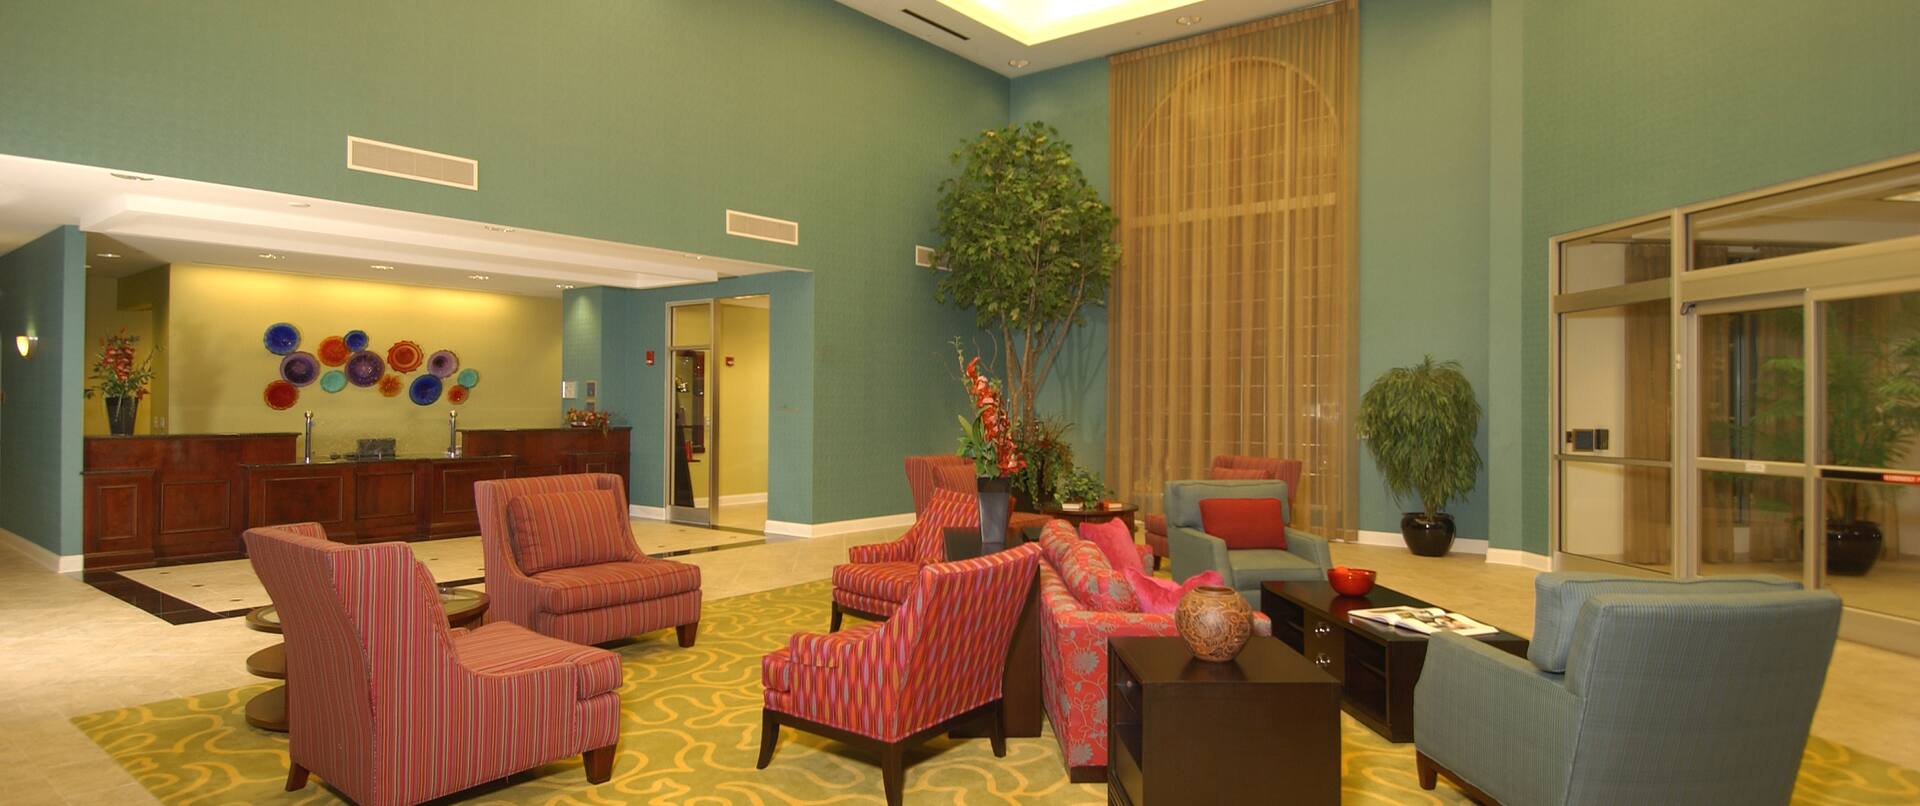 Lobby Seating Area, Font Desk, Window With Closed Drapes, and Entrance at NIght